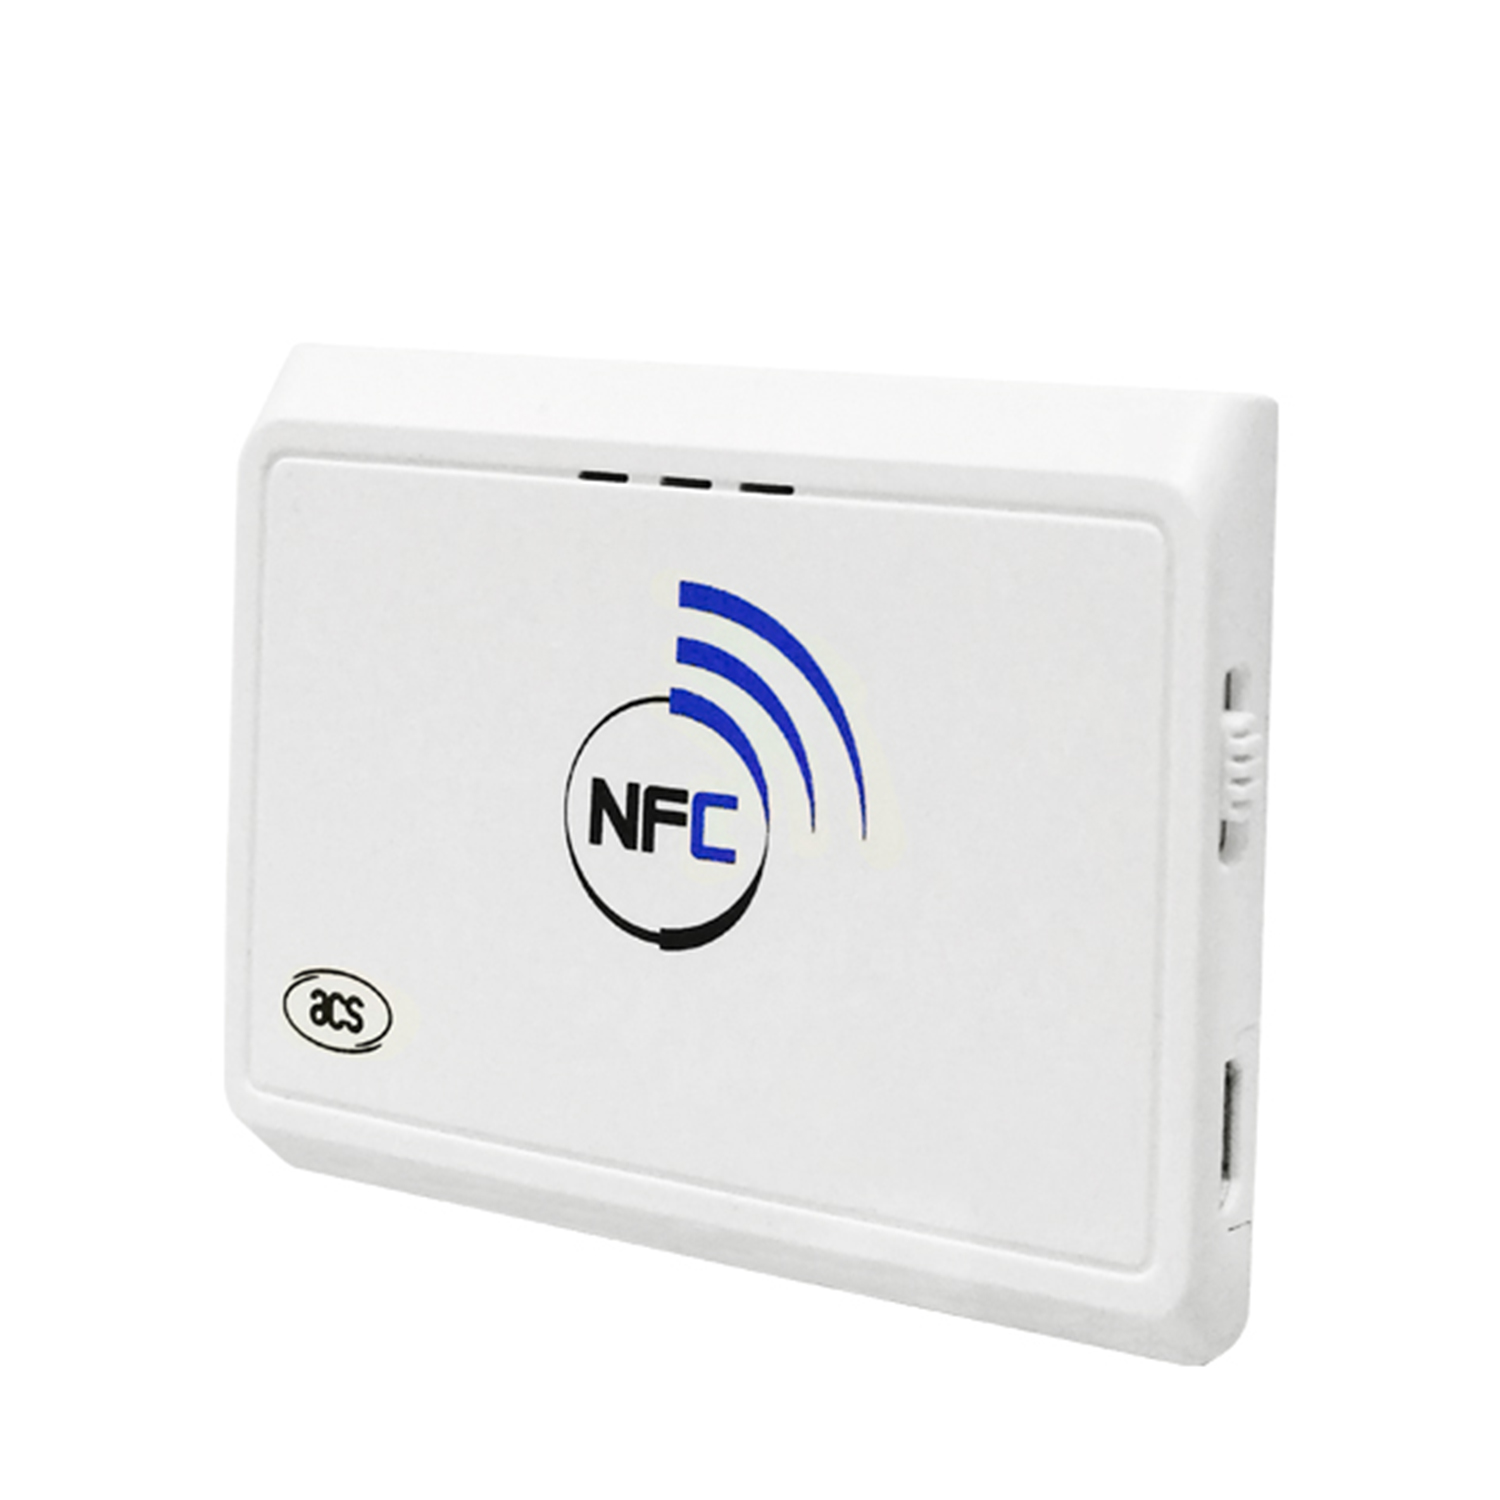 HCCTG NFC Tags Mobile ACS Smart Card Reader for E-Payment ACR1311U-N2